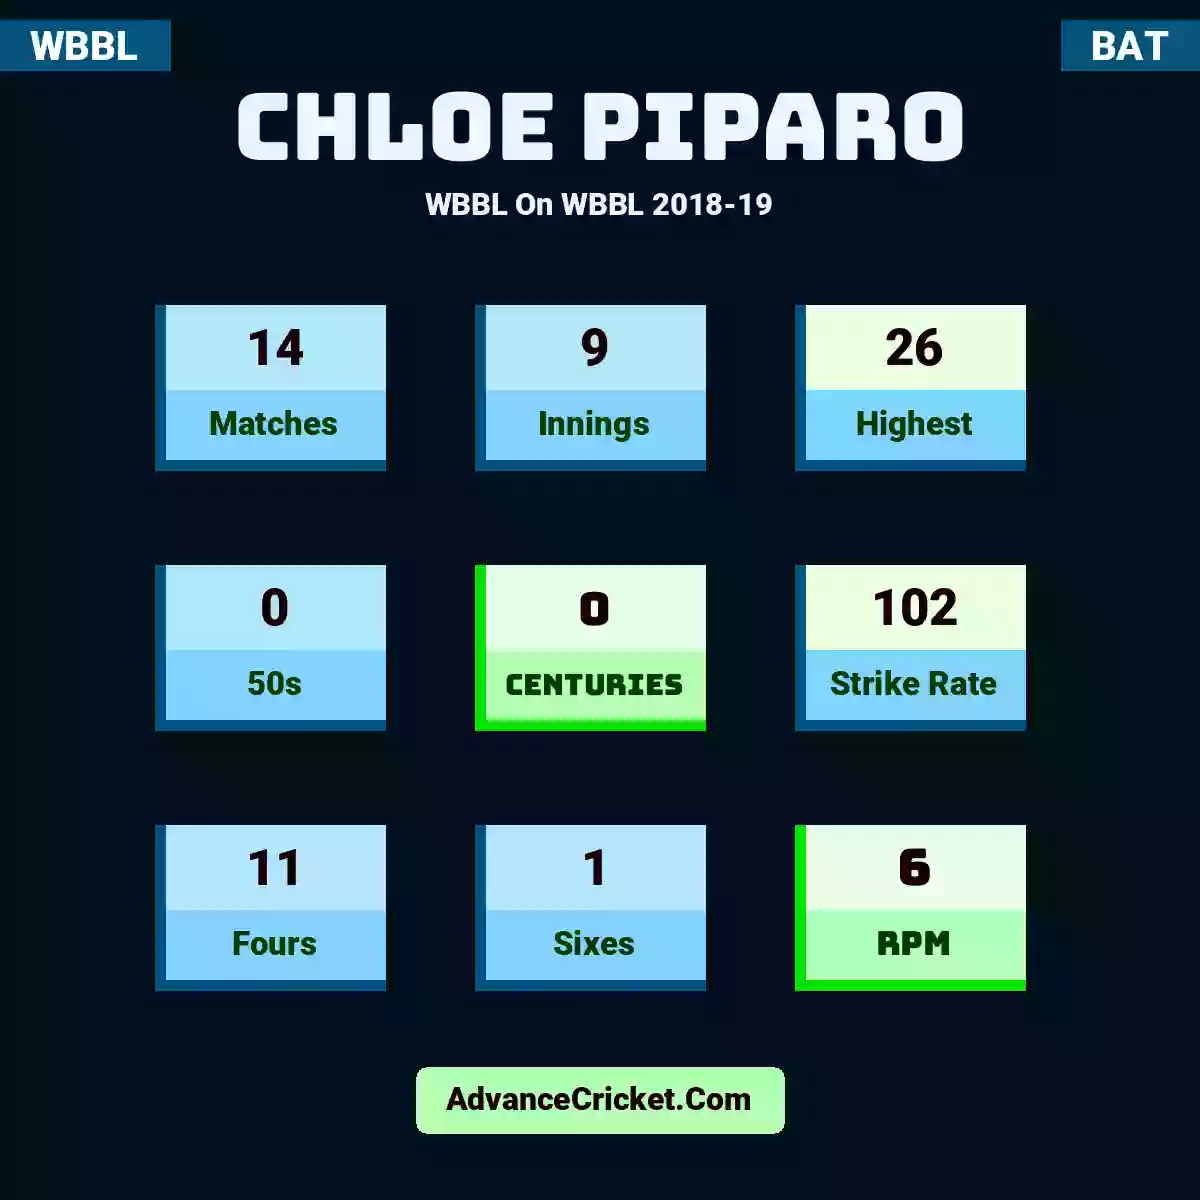 Chloe Piparo WBBL  On WBBL 2018-19, Chloe Piparo played 14 matches, scored 26 runs as highest, 0 half-centuries, and 0 centuries, with a strike rate of 102. C.Piparo hit 11 fours and 1 sixes, with an RPM of 6.